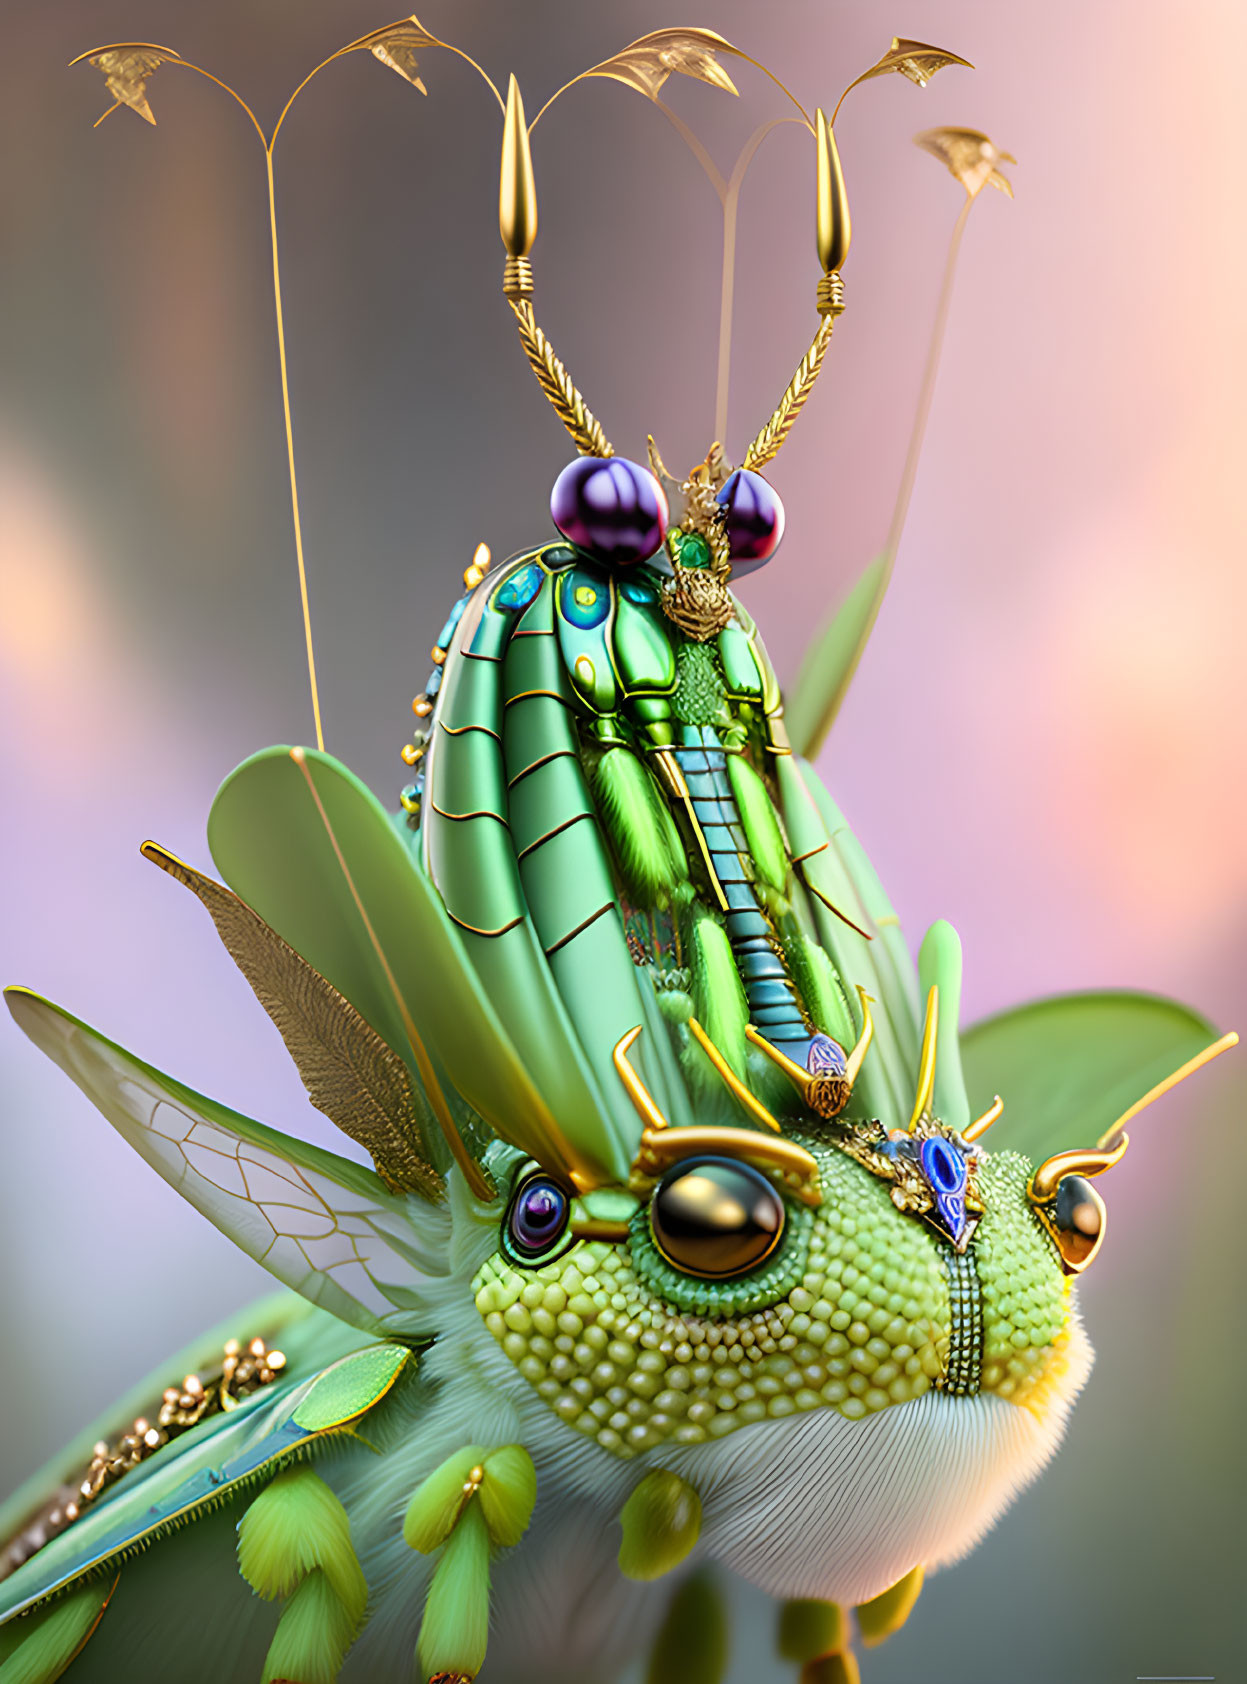 Hyper-detailed jewel-encrusted green insect on soft-focus pastel background